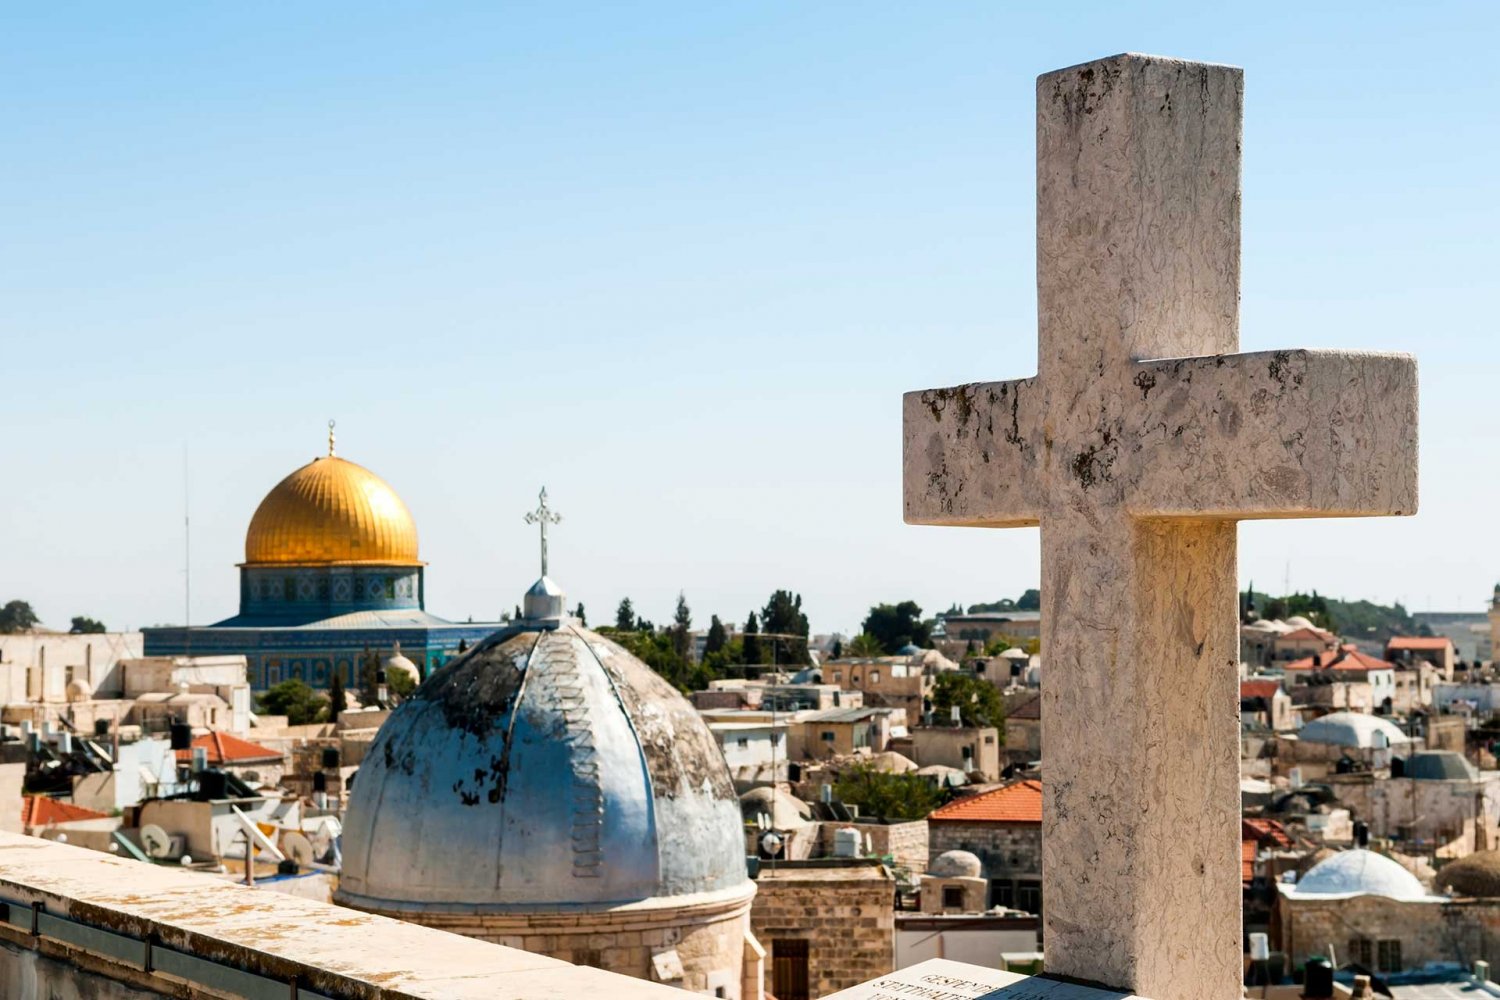 A cross atop a building in the Old City of Jerusalem. In the background are two domes, one a church with a cross and the other the Dome of the Rock with a crescent.